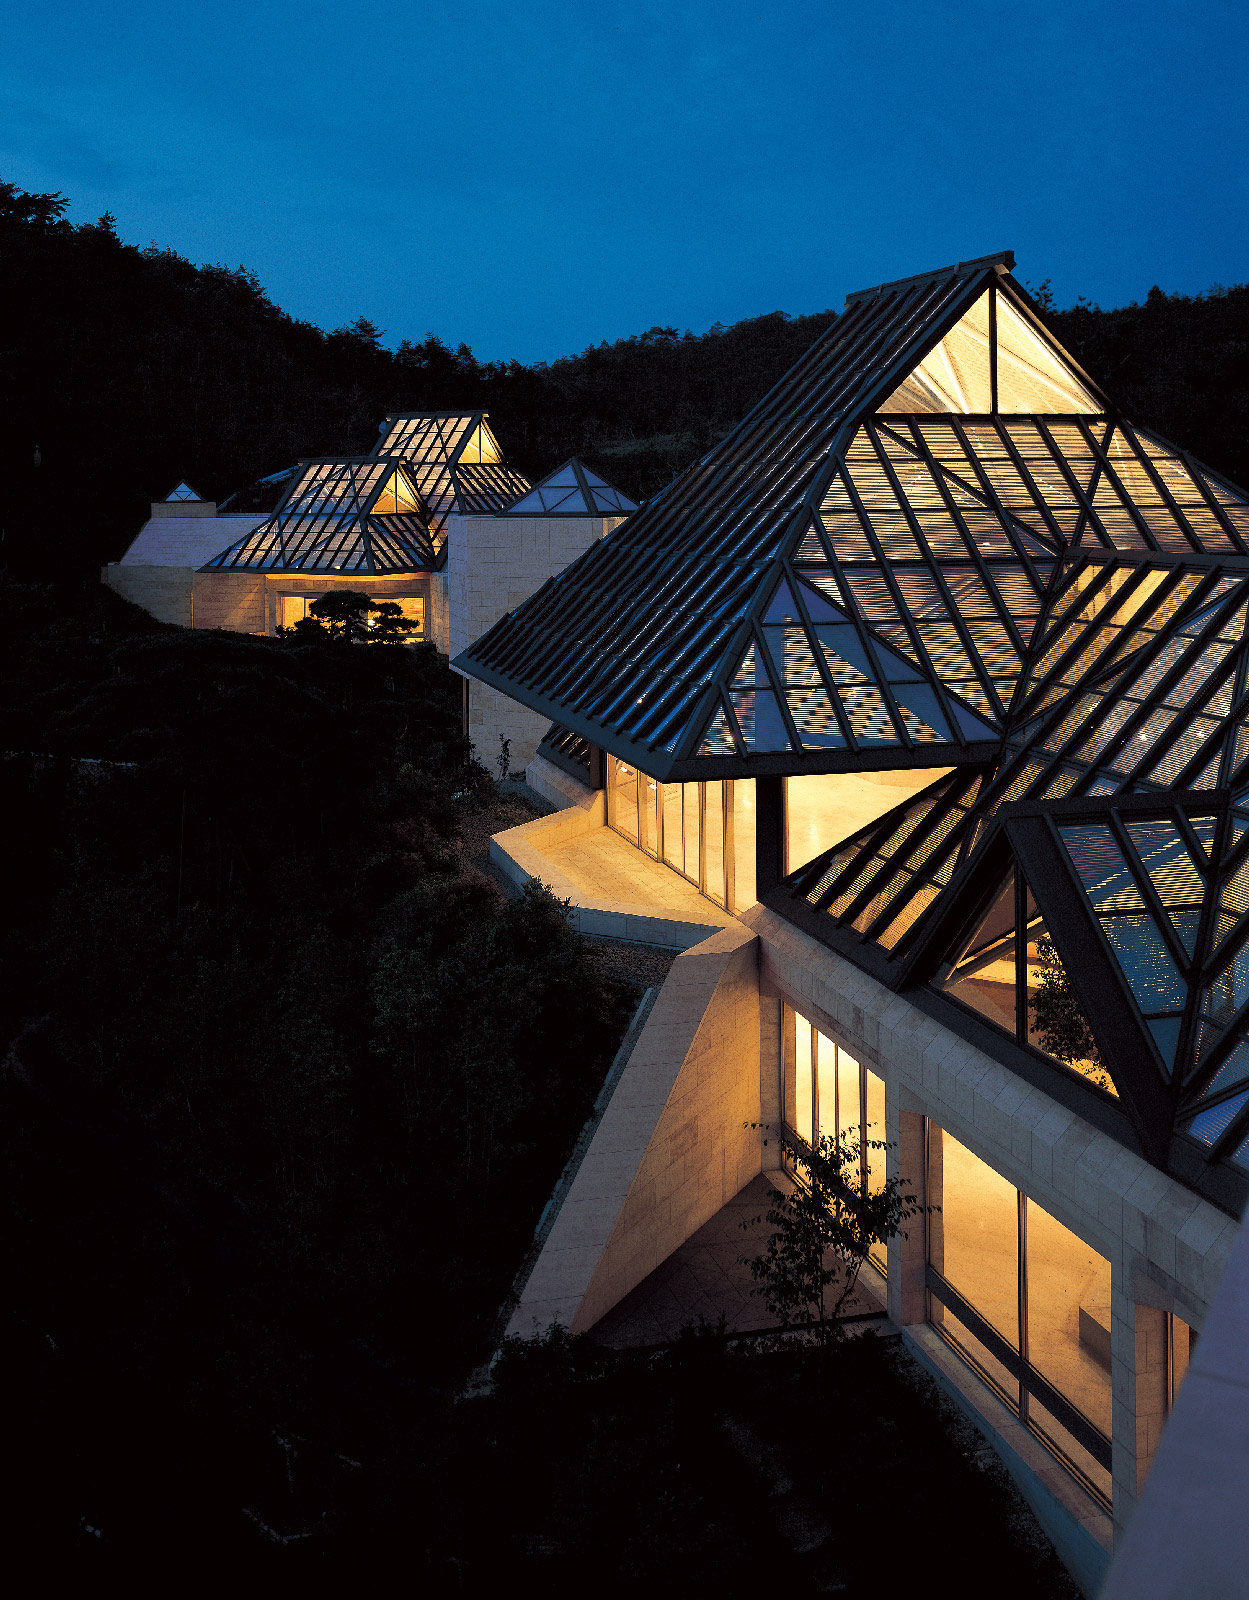 miho museum architecture